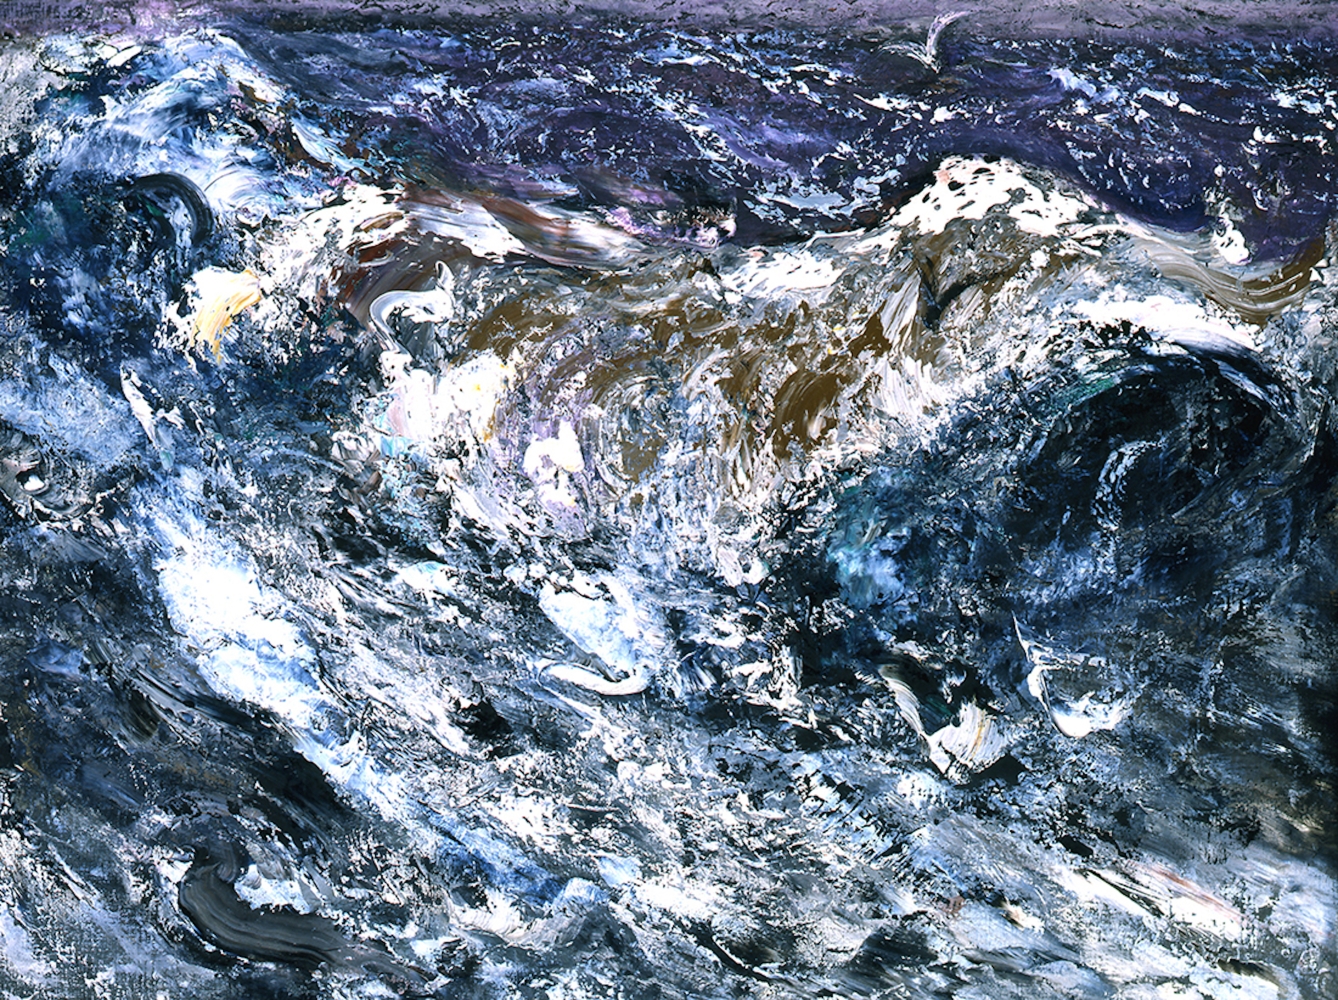 Maggi Hambling
Storm Waves at Slaughden, 2008
oil on canvas
36 &amp;times; 48 in. / 91.4 &amp;times; 121.9 cm